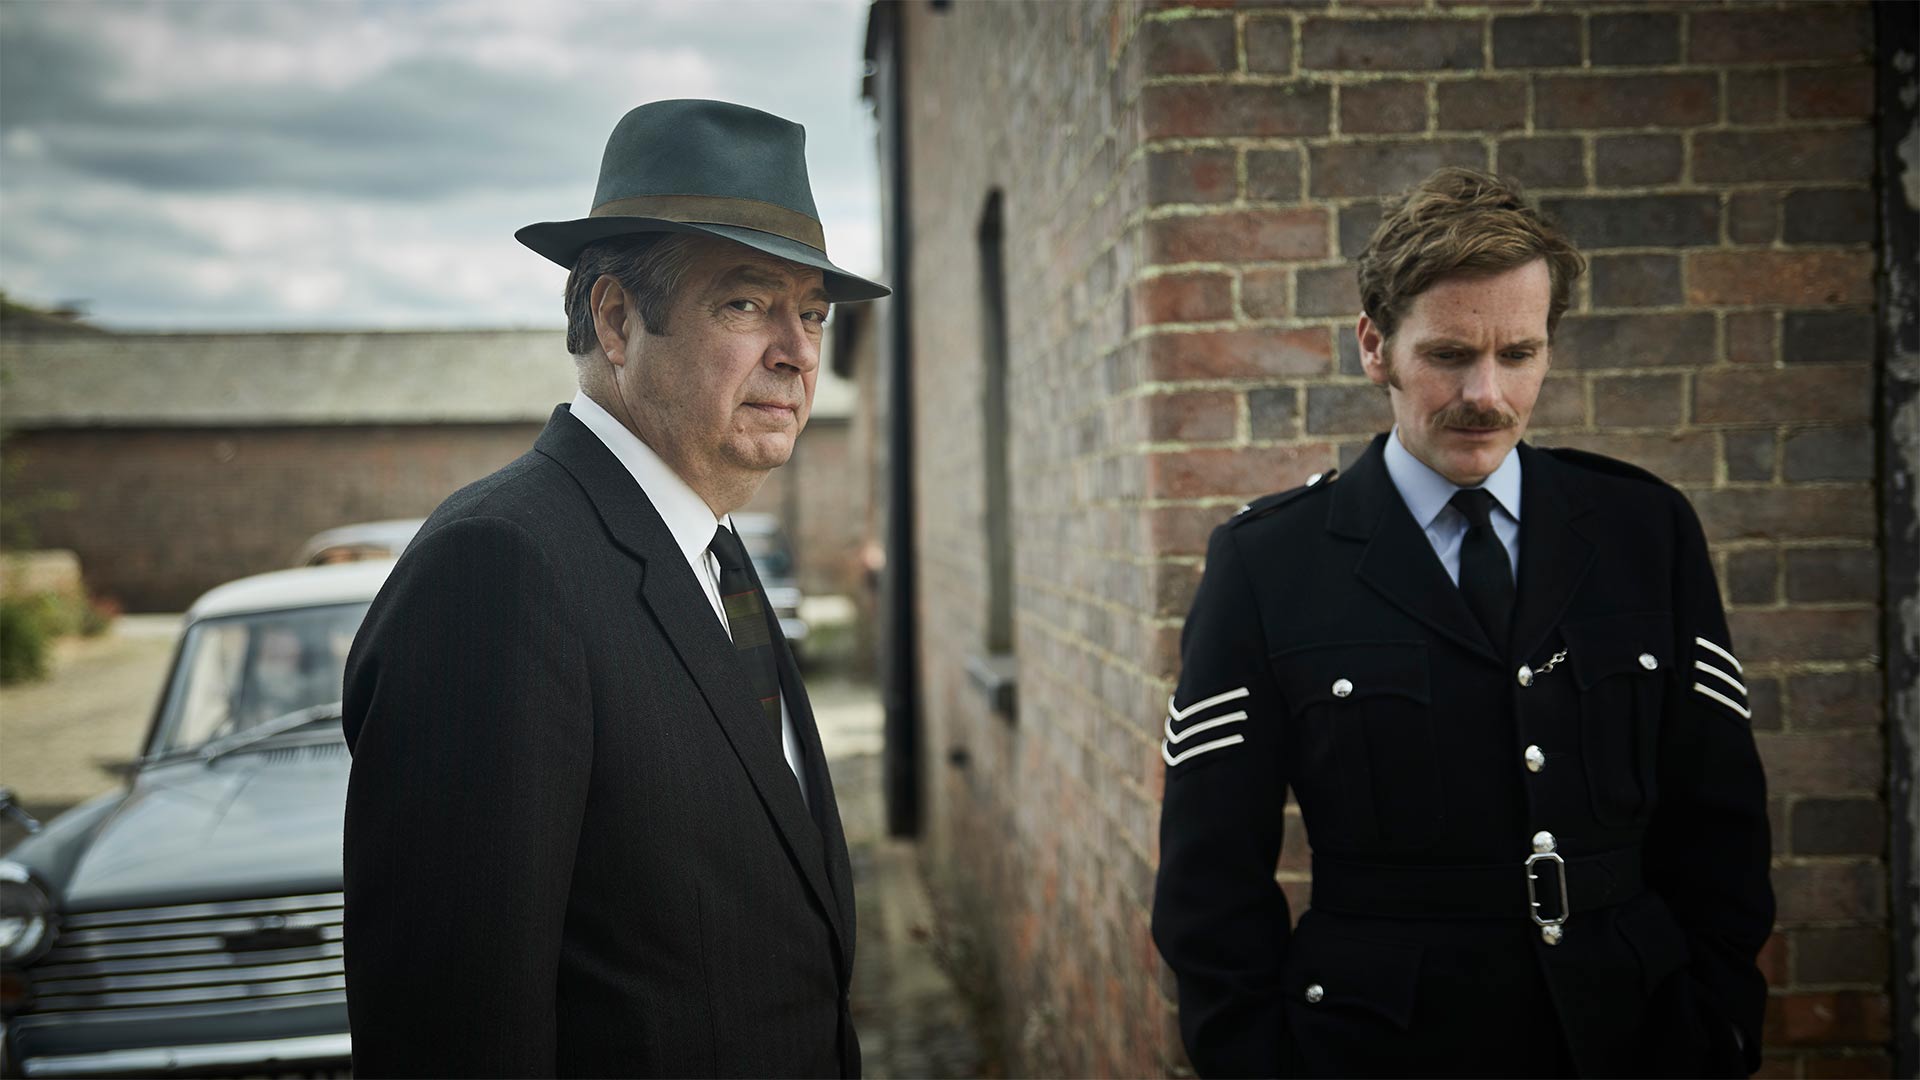 Pictured from left to right: ROGER ALLAM as DI Fred Thursday and SHAUN EVANS as Endeavour